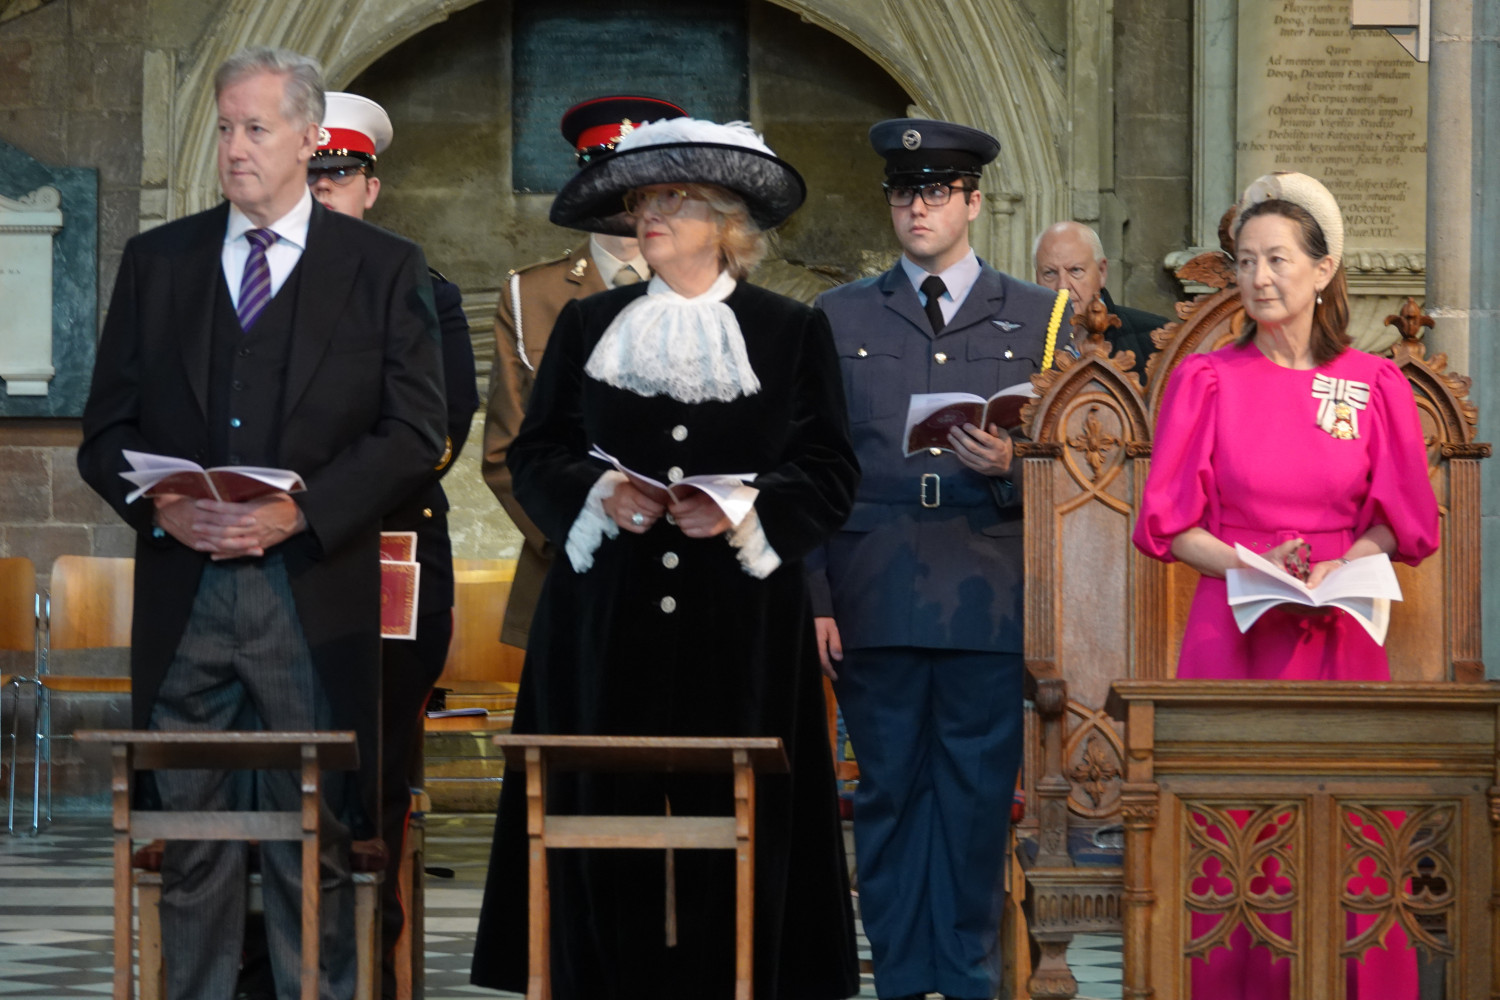 The high sheriff and Lord Lieutenant at the coronation service